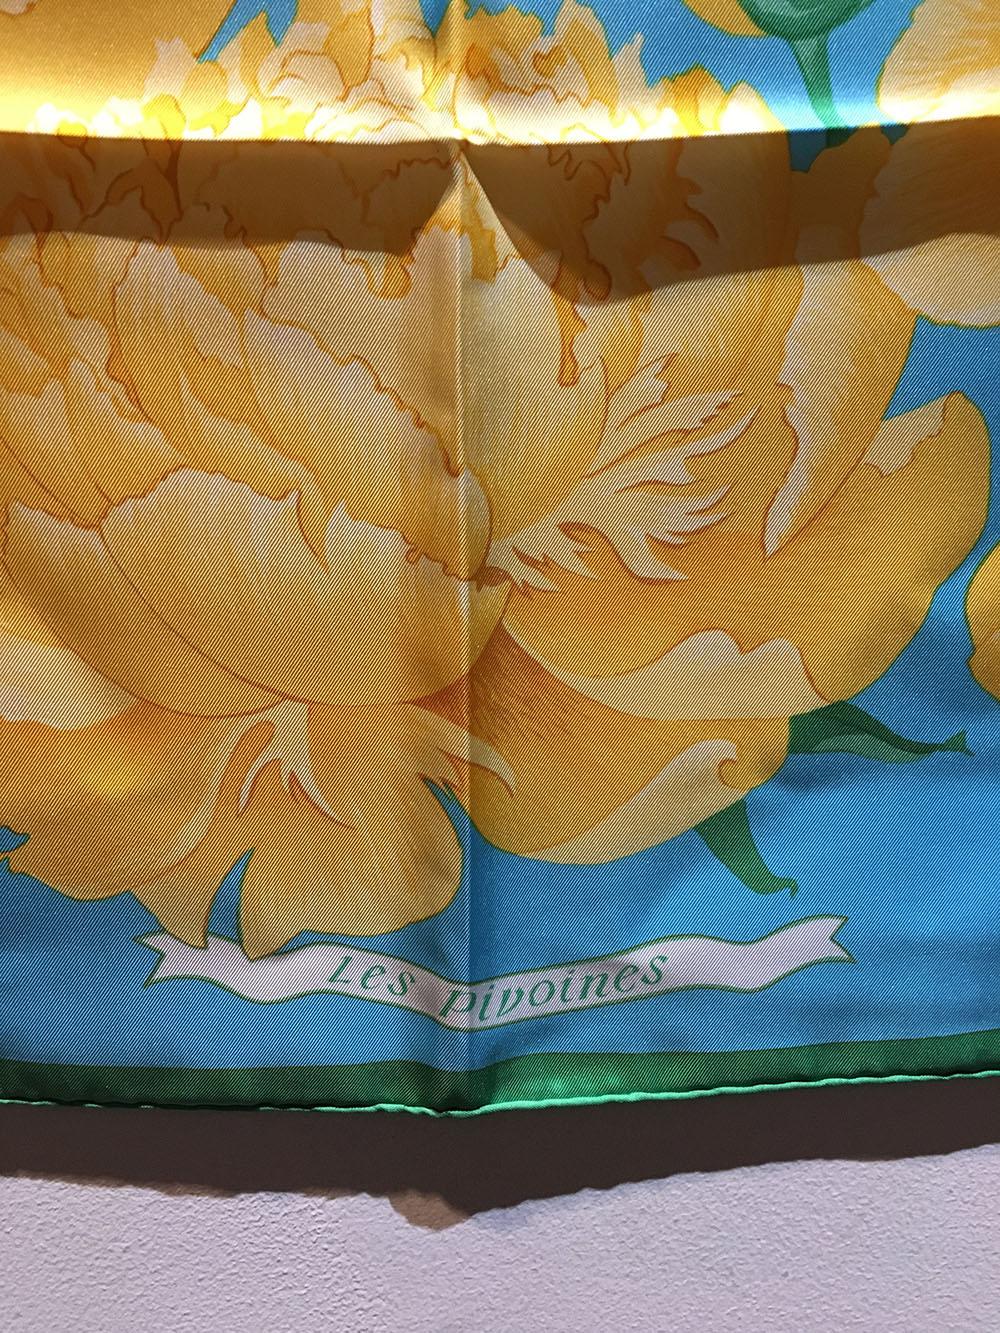 Hermes Vintage Les Pivoines Silk Scarf in excellent condition. Original silk screen design c1978 by Christiane Vauzelles features beautiful yellow peonies over a blue background surrounded by a thin green square border. 100% silk, hand rolled hem,